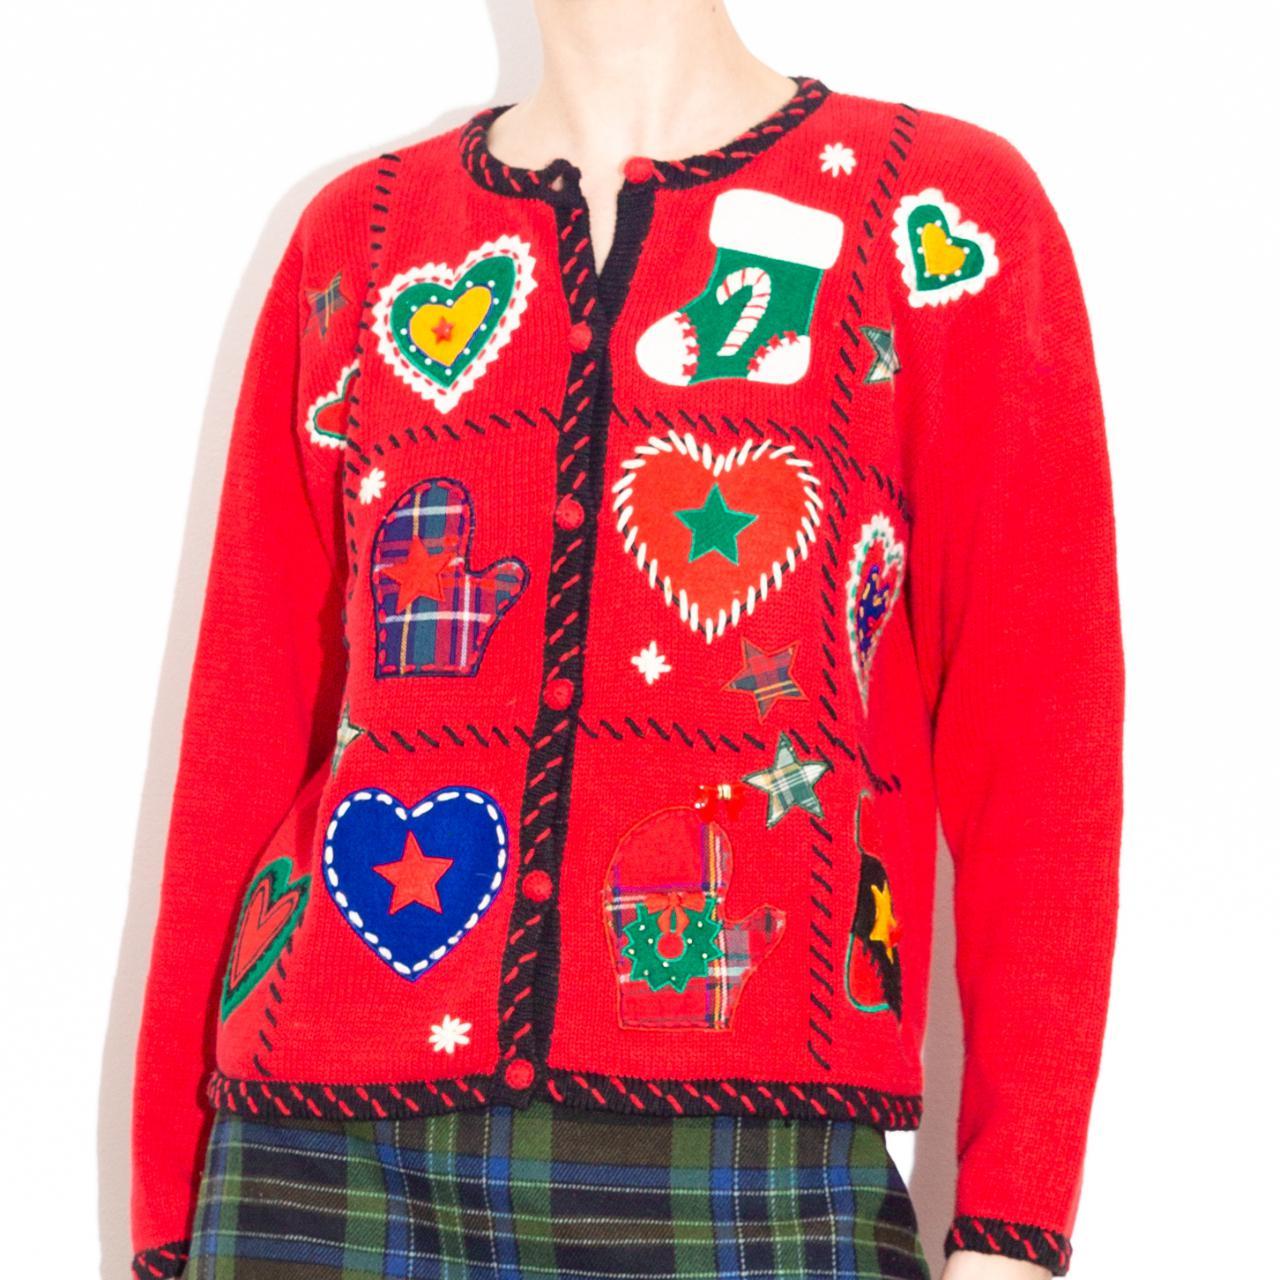 Product Image 1 - Vintage Christmas cardigan sweater with